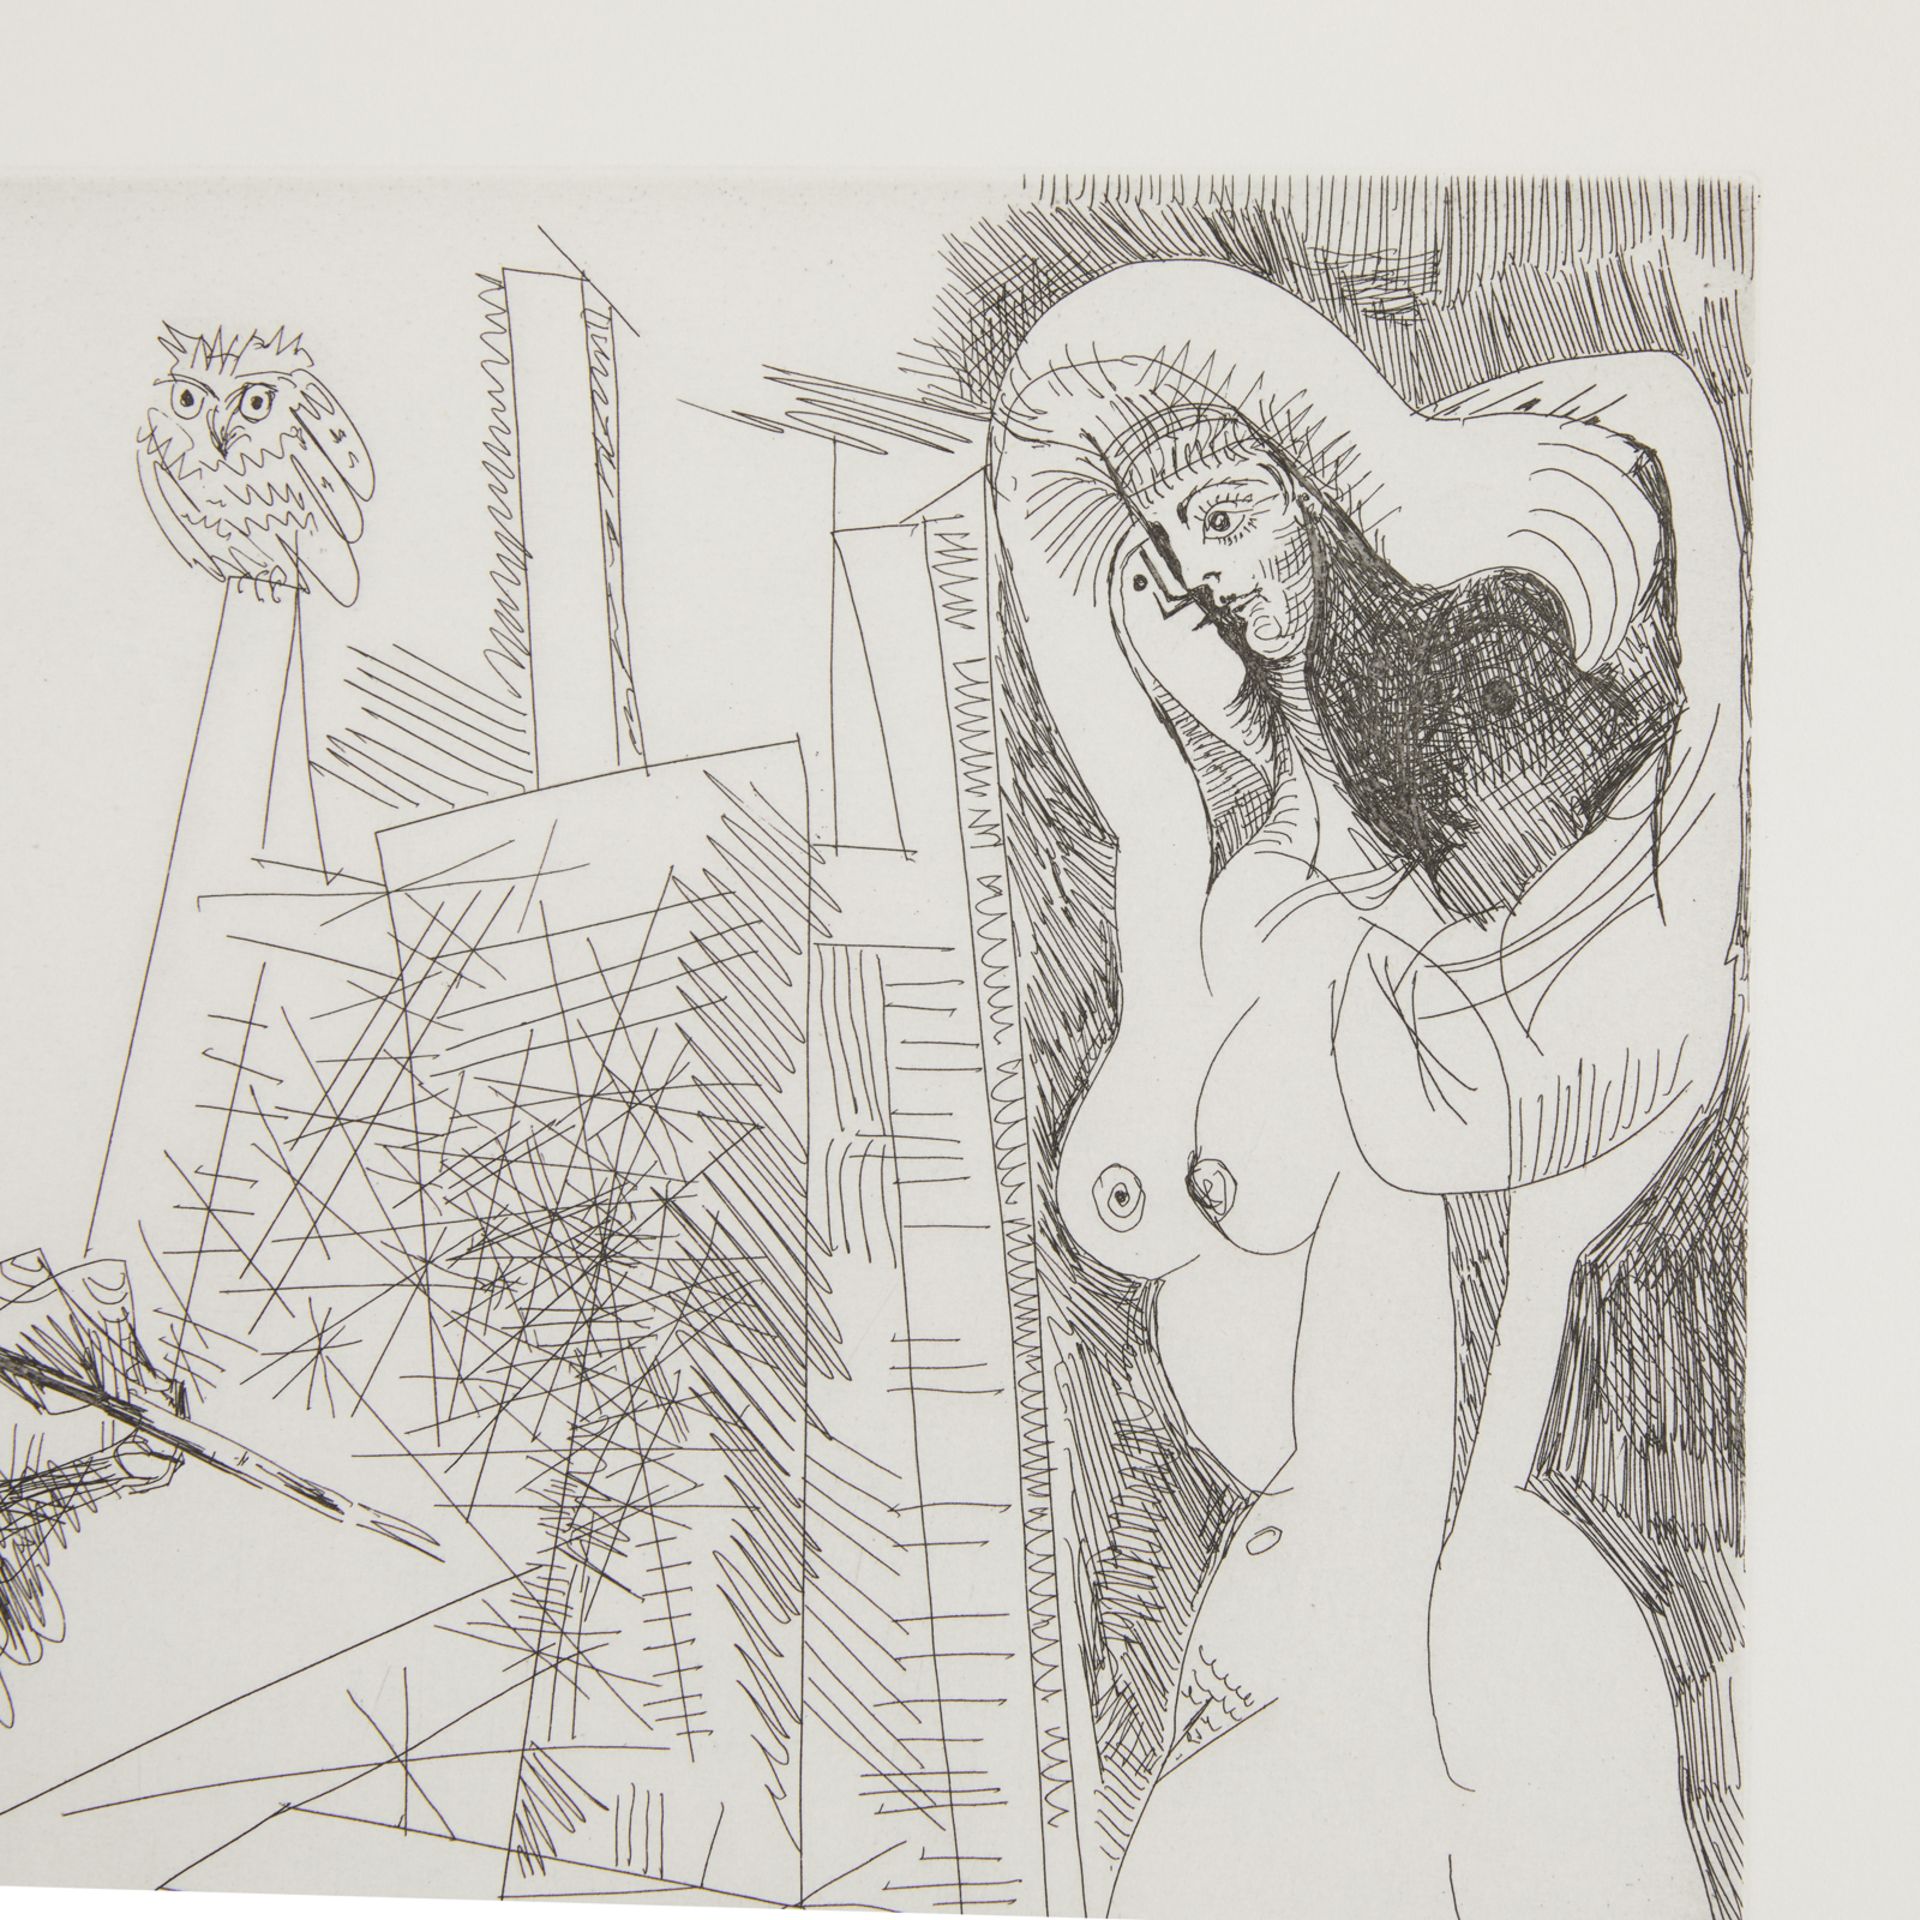 Picasso "L'Atelier" Etching 347 Series - Image 5 of 7